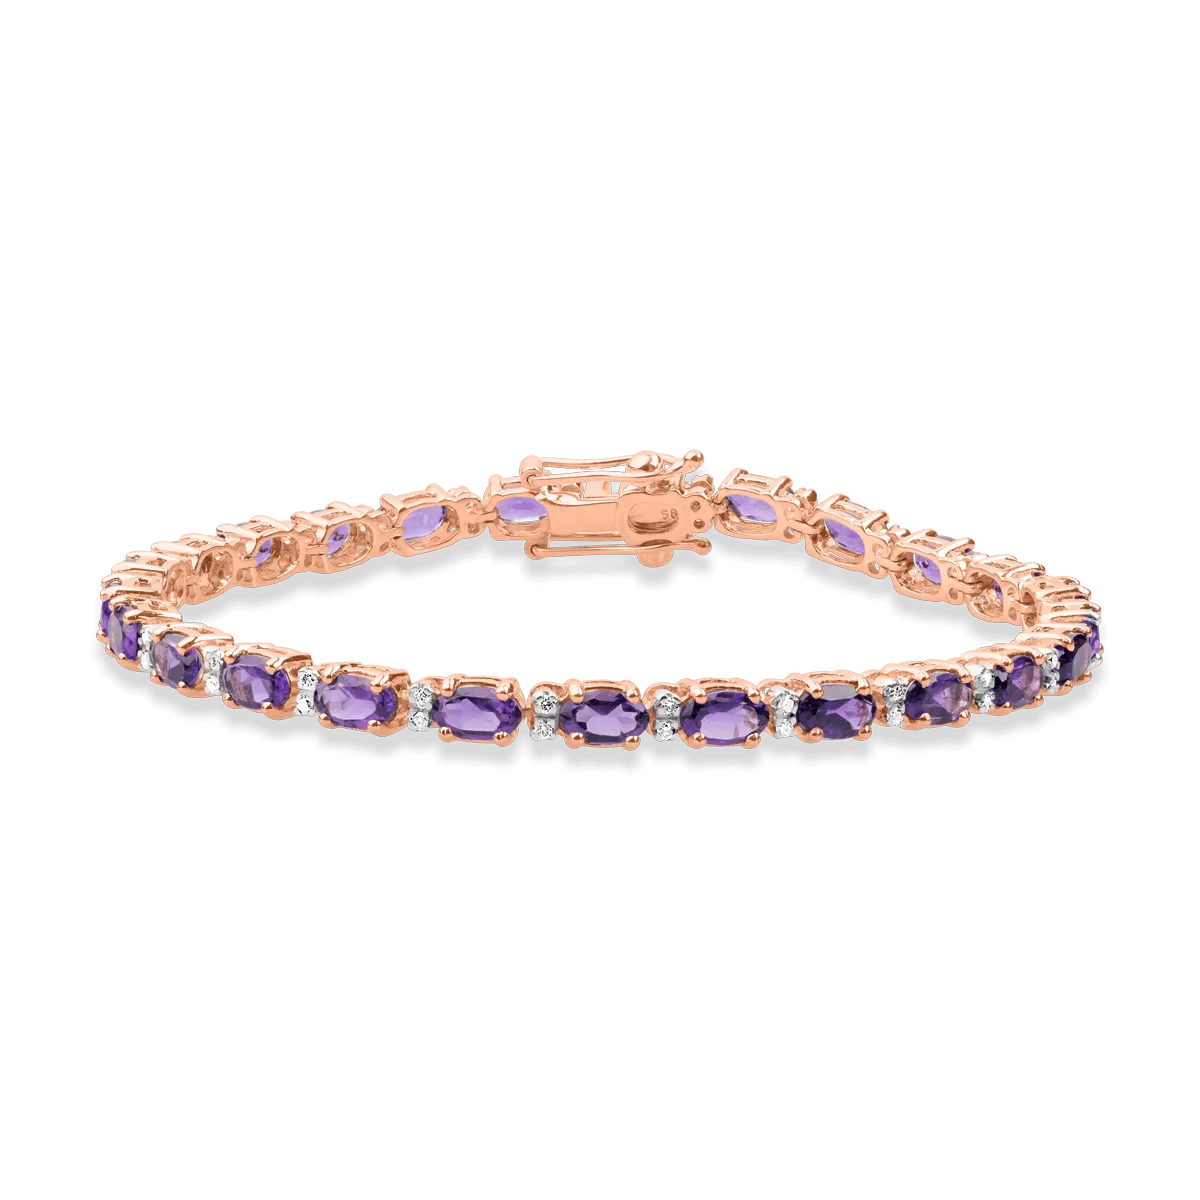 18K rose gold tennis bracelet with 4.97ct amethysts and 0.25ct diamonds